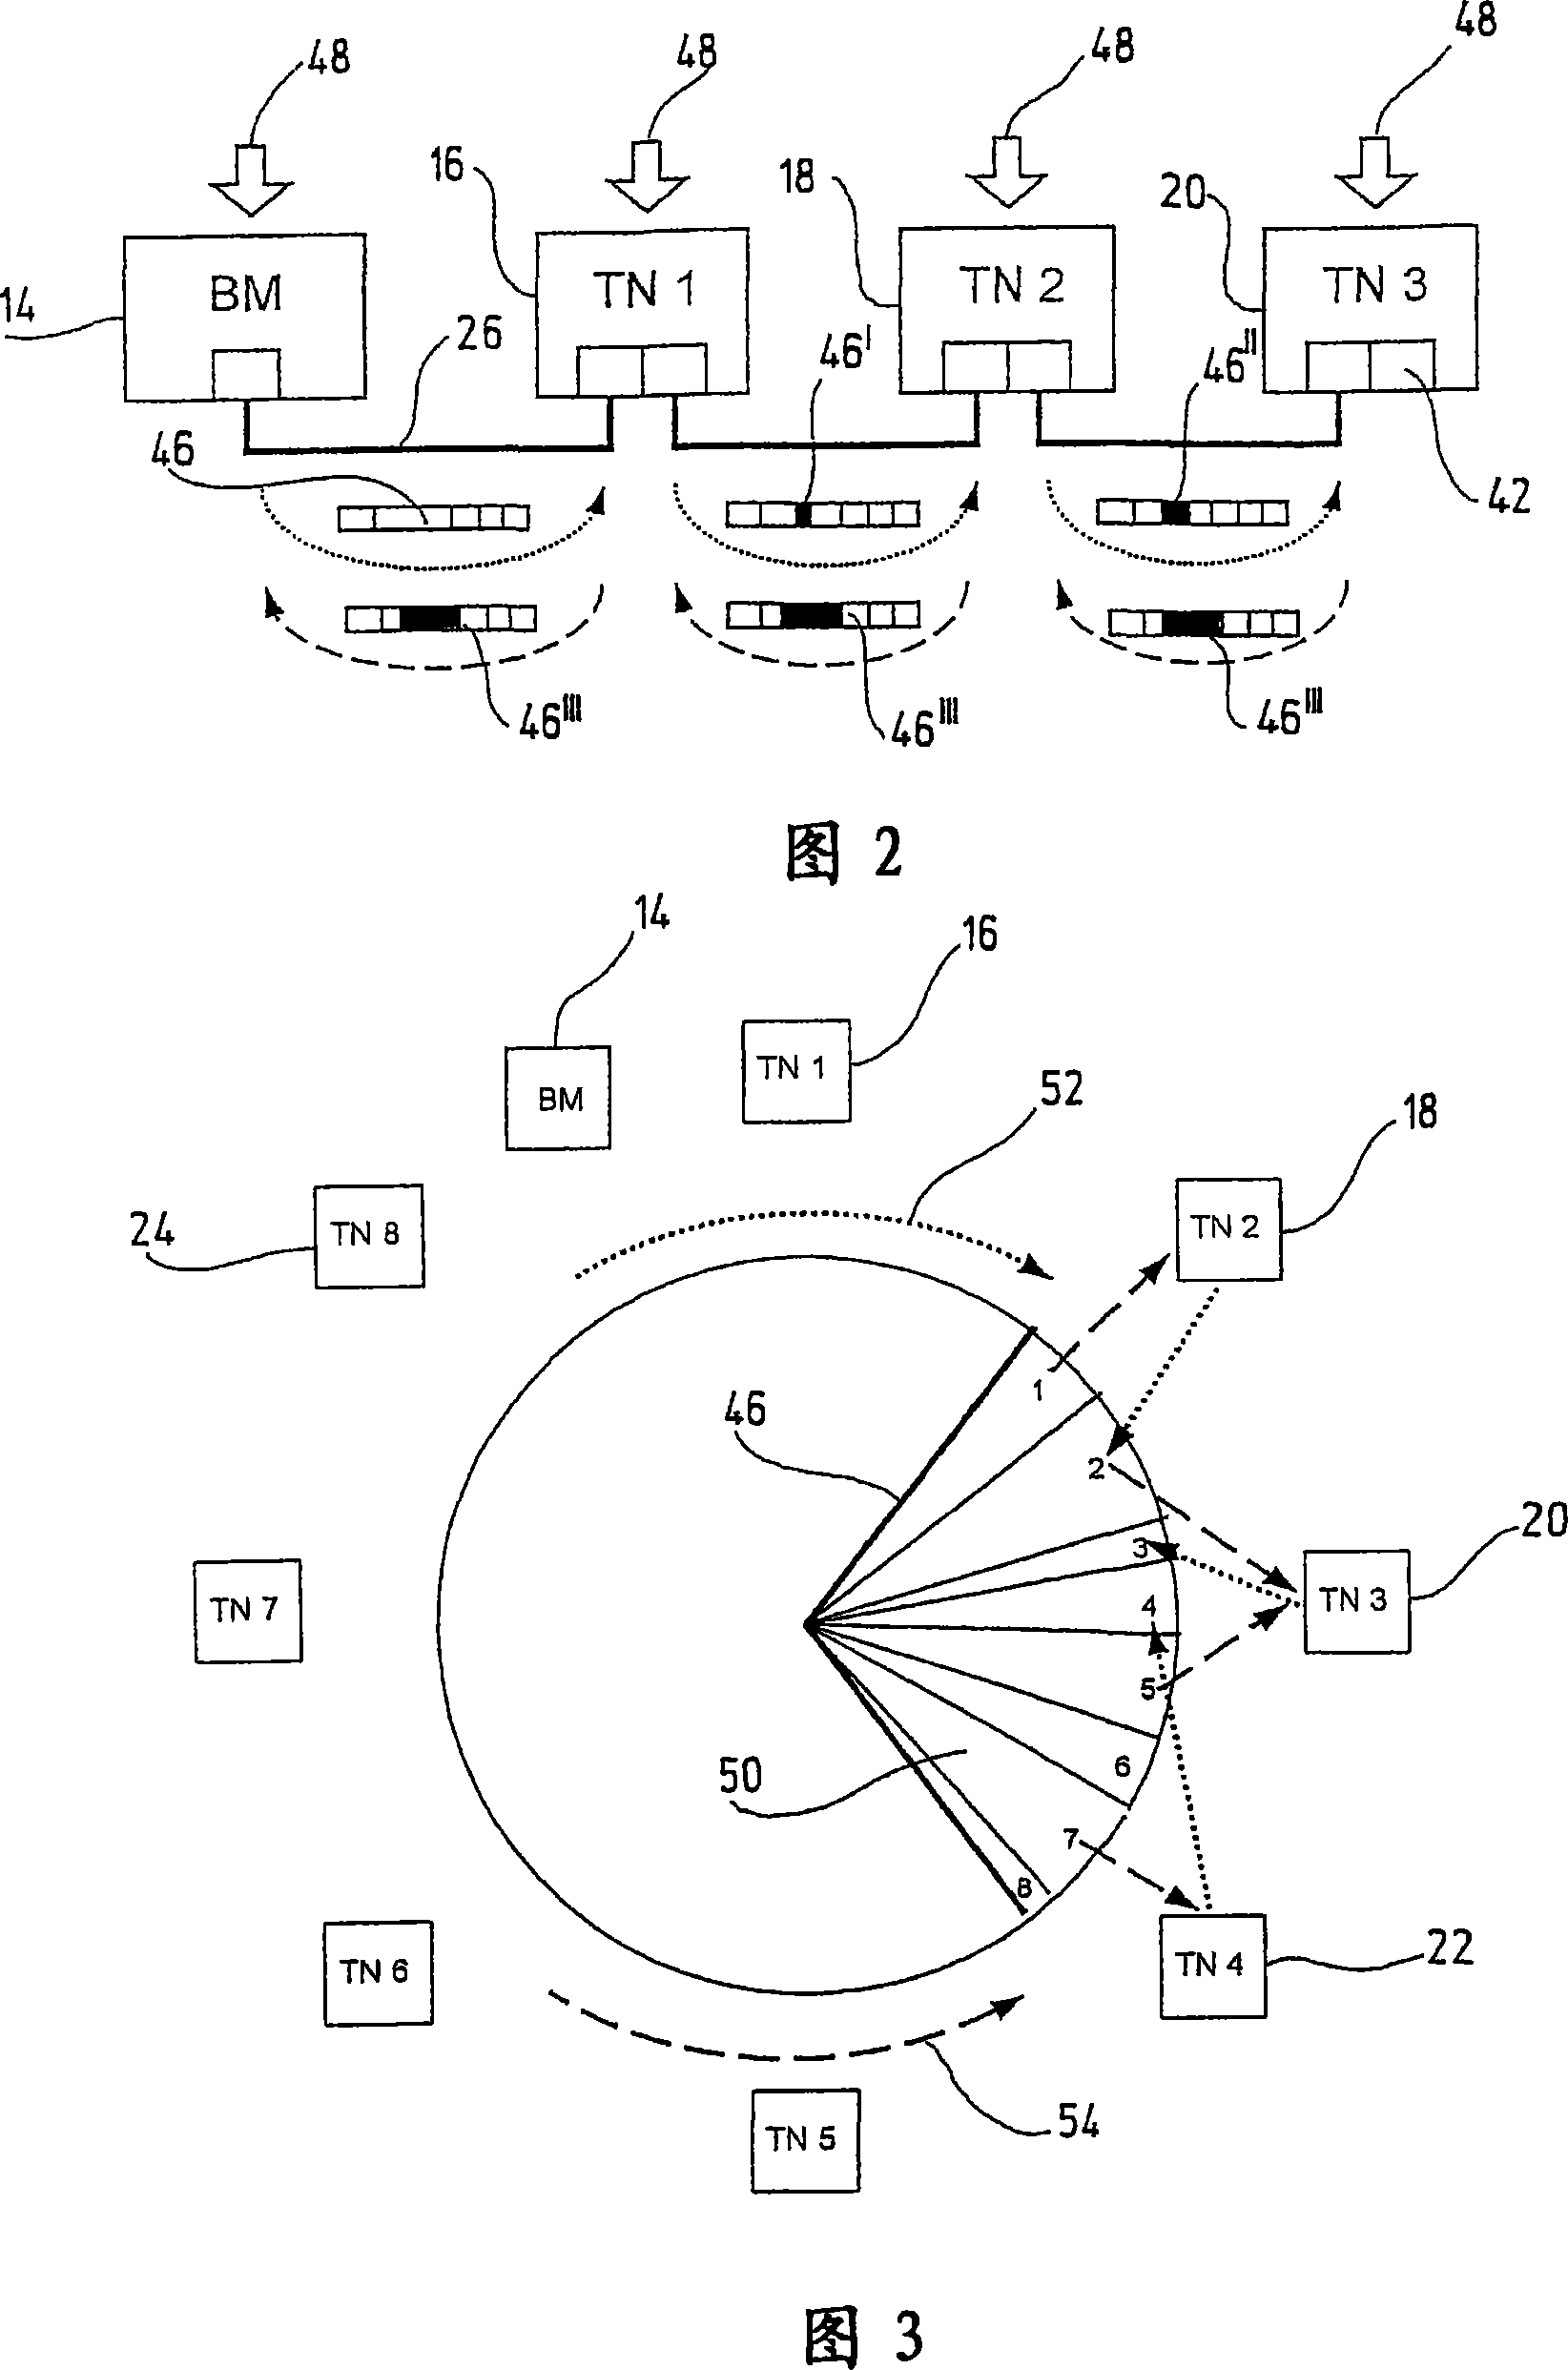 Control system having a plurality of spatially distributed stations, and method for transmitting data in such a control system